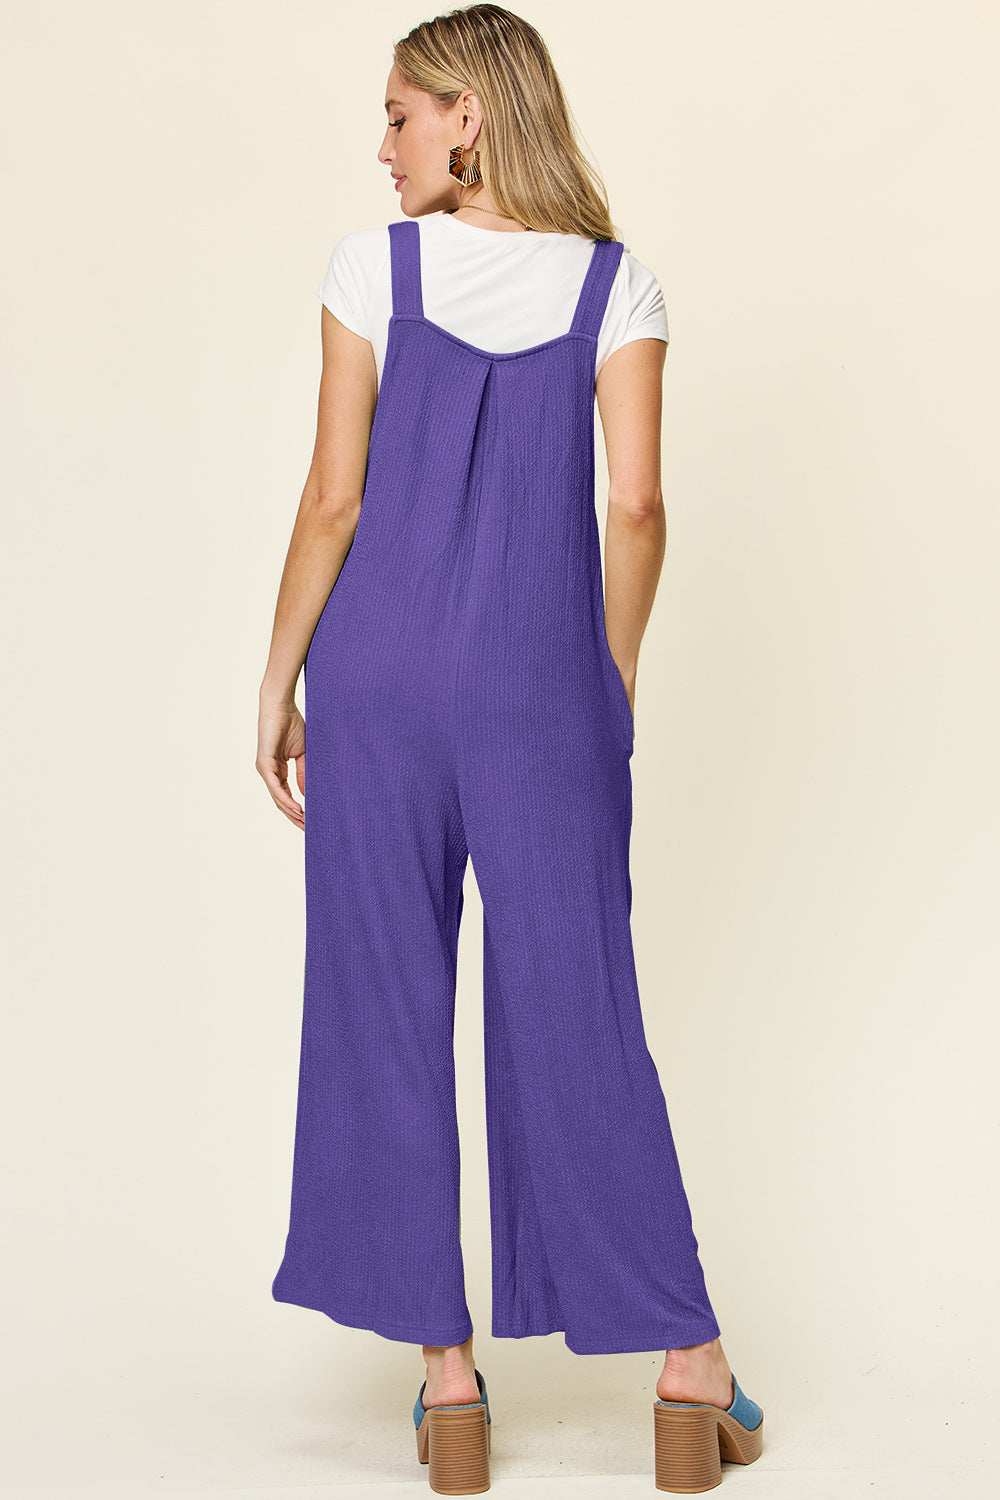 Double Take Texture Sleeveless Wide Leg Overall